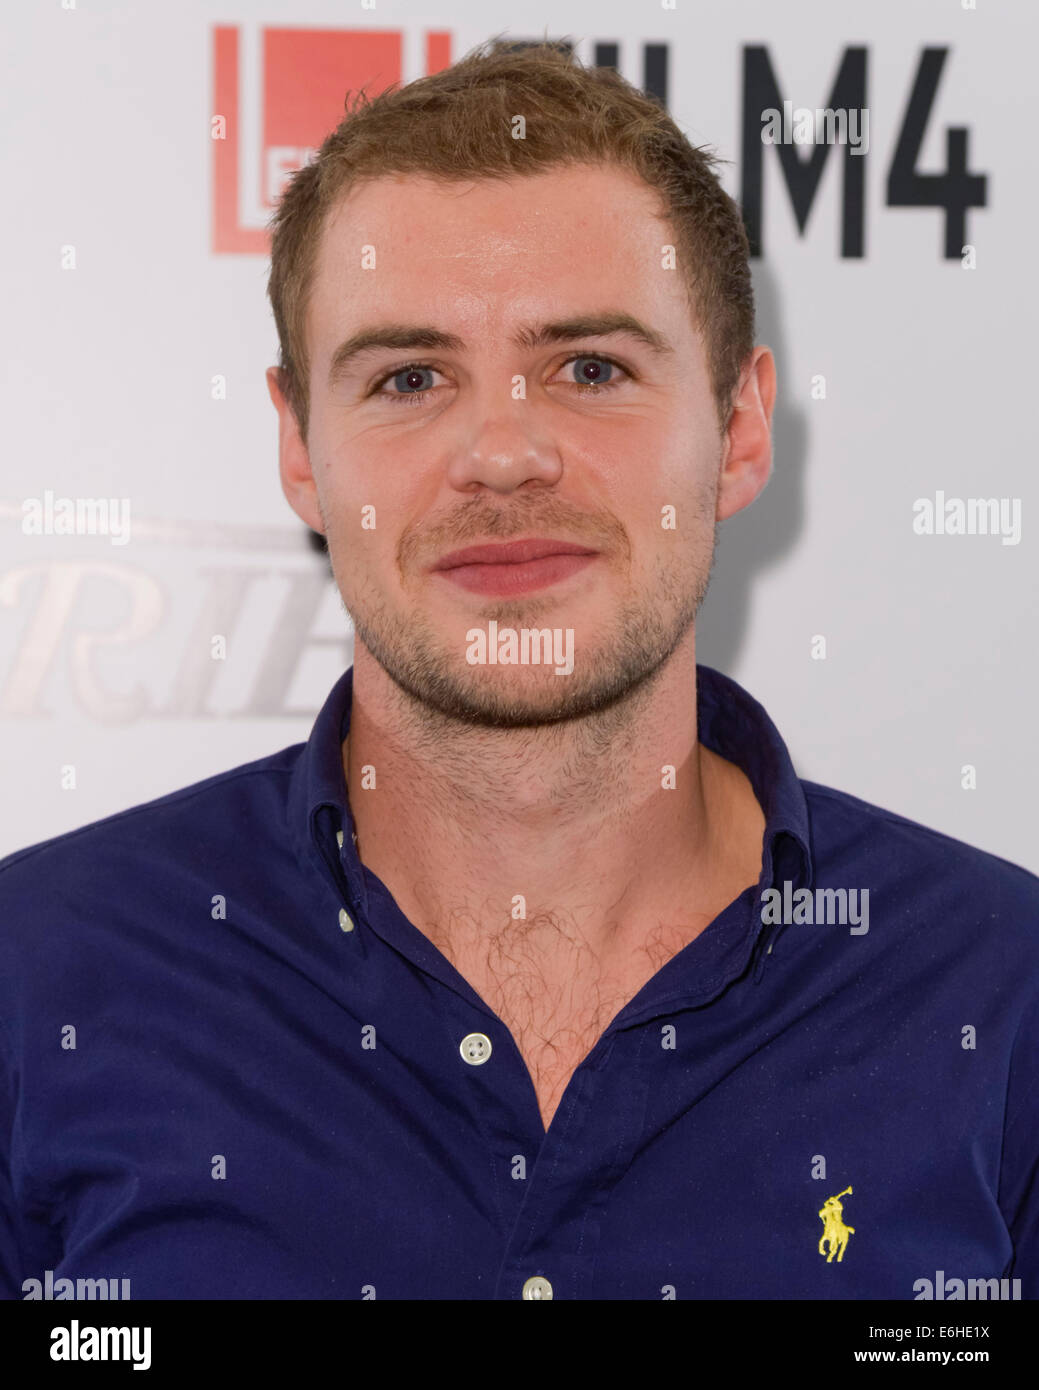 The 15th Film4 Frightfest on 23/08/2014 at The VUE West End, London. The cast attend the World Premiere of The Mirror.  Persons pictured: Nate Fallows. Picture by Julie Edwards Stock Photo